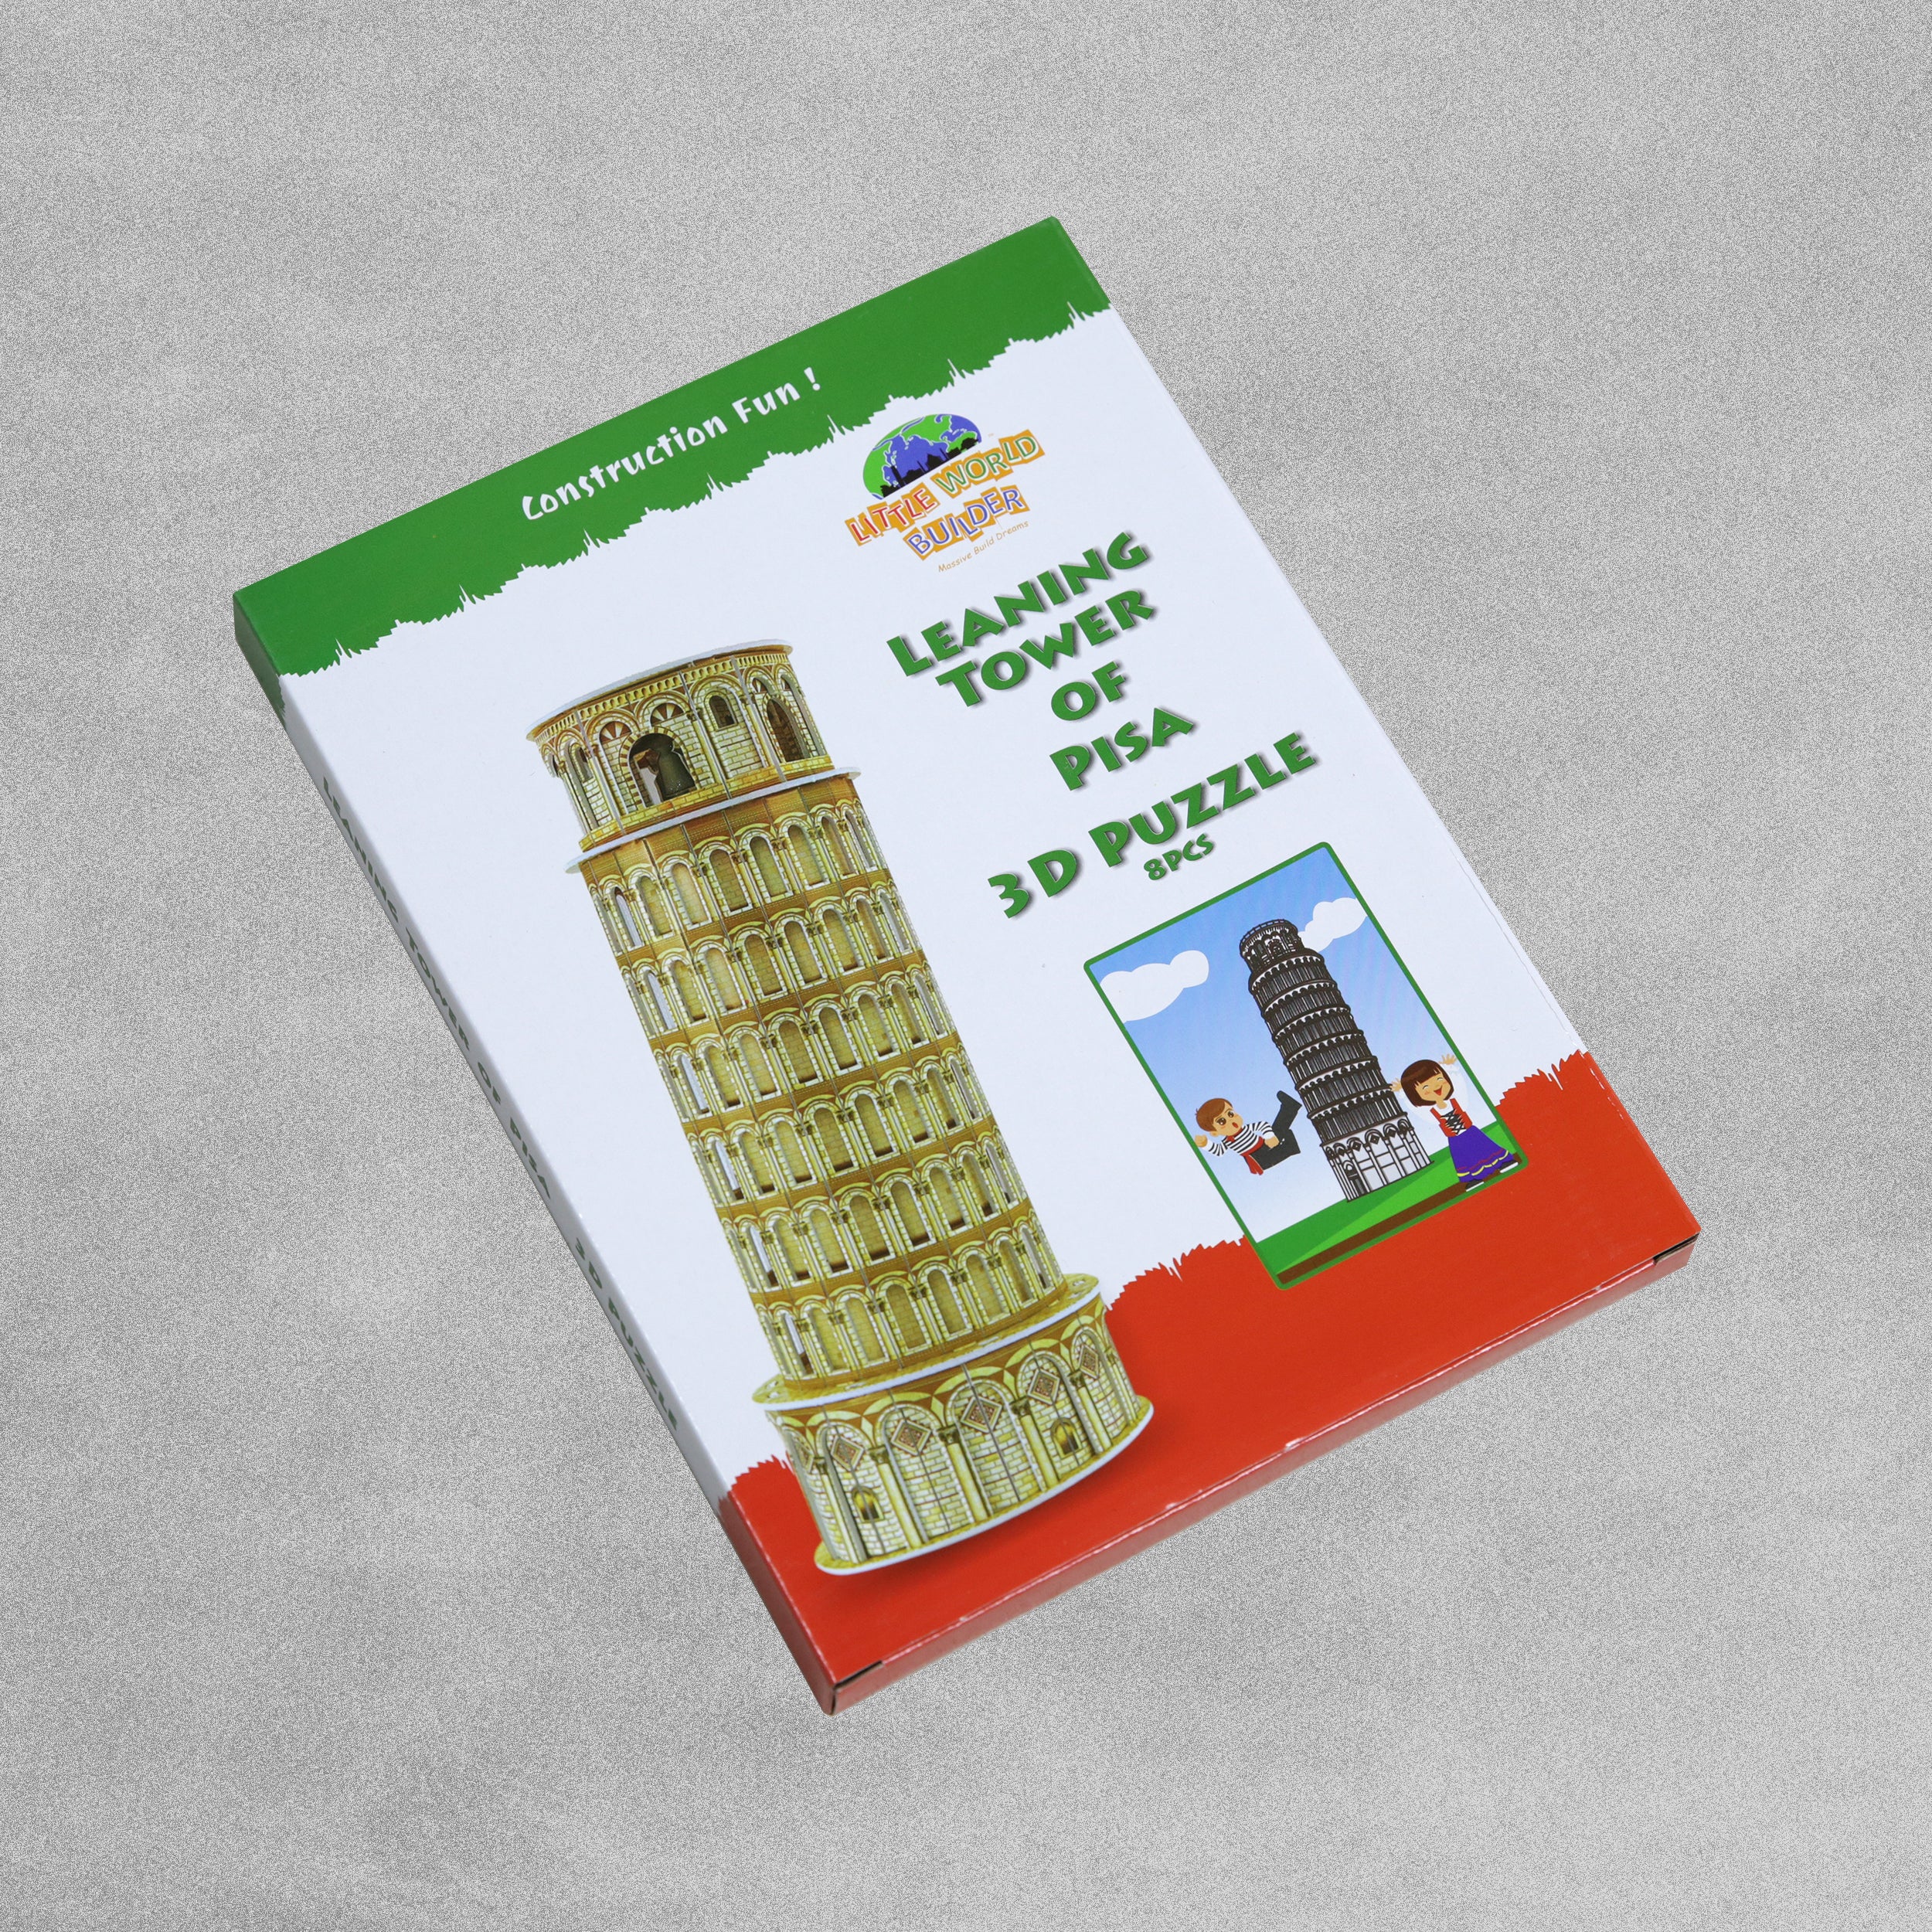 Little World Builder 3D puzzle of the Leaning Tower Of Pisa